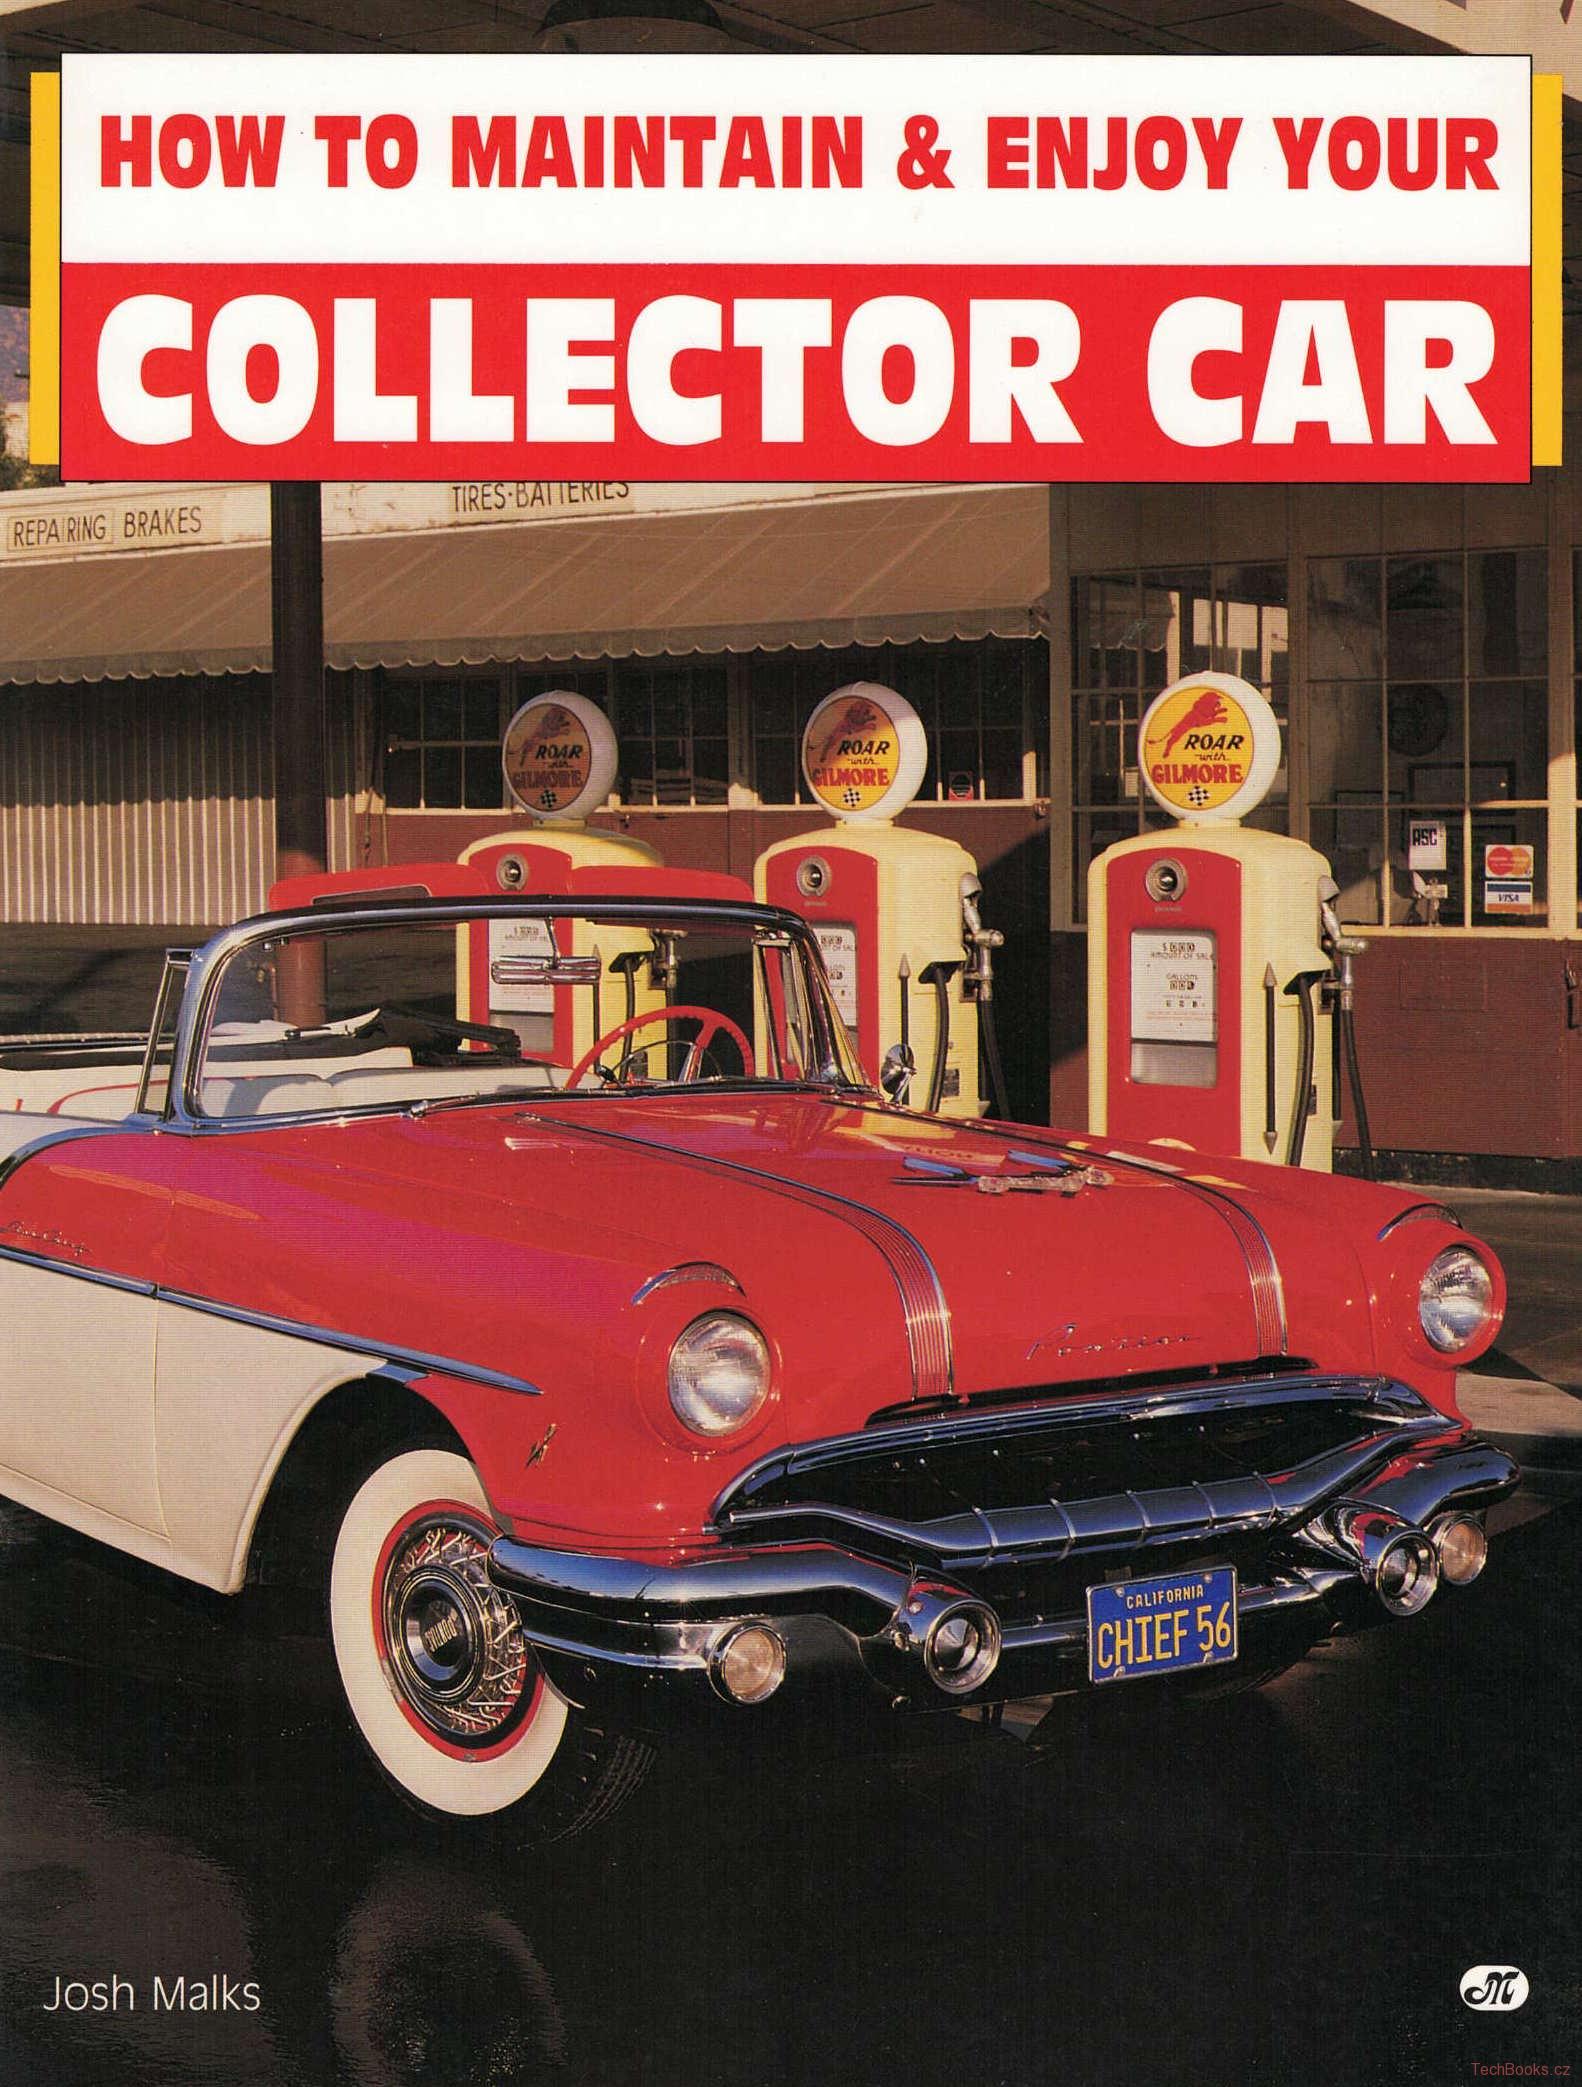 Collector Car, How to Maintain & Enjoy Your...